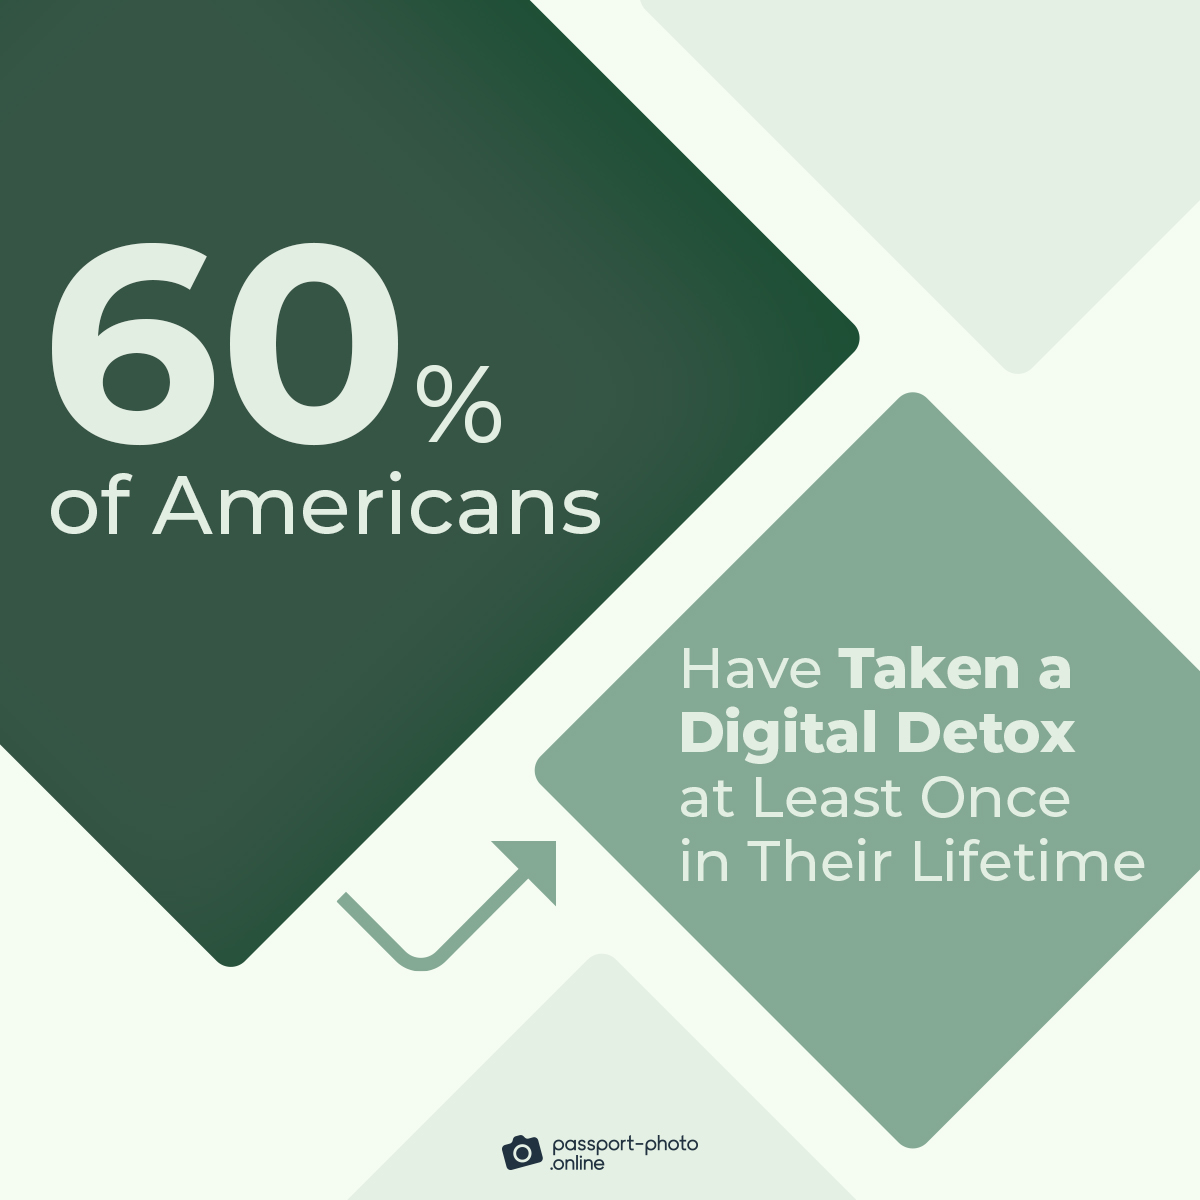 62% of people in the US have taken a digital detox at least once in their lifetime